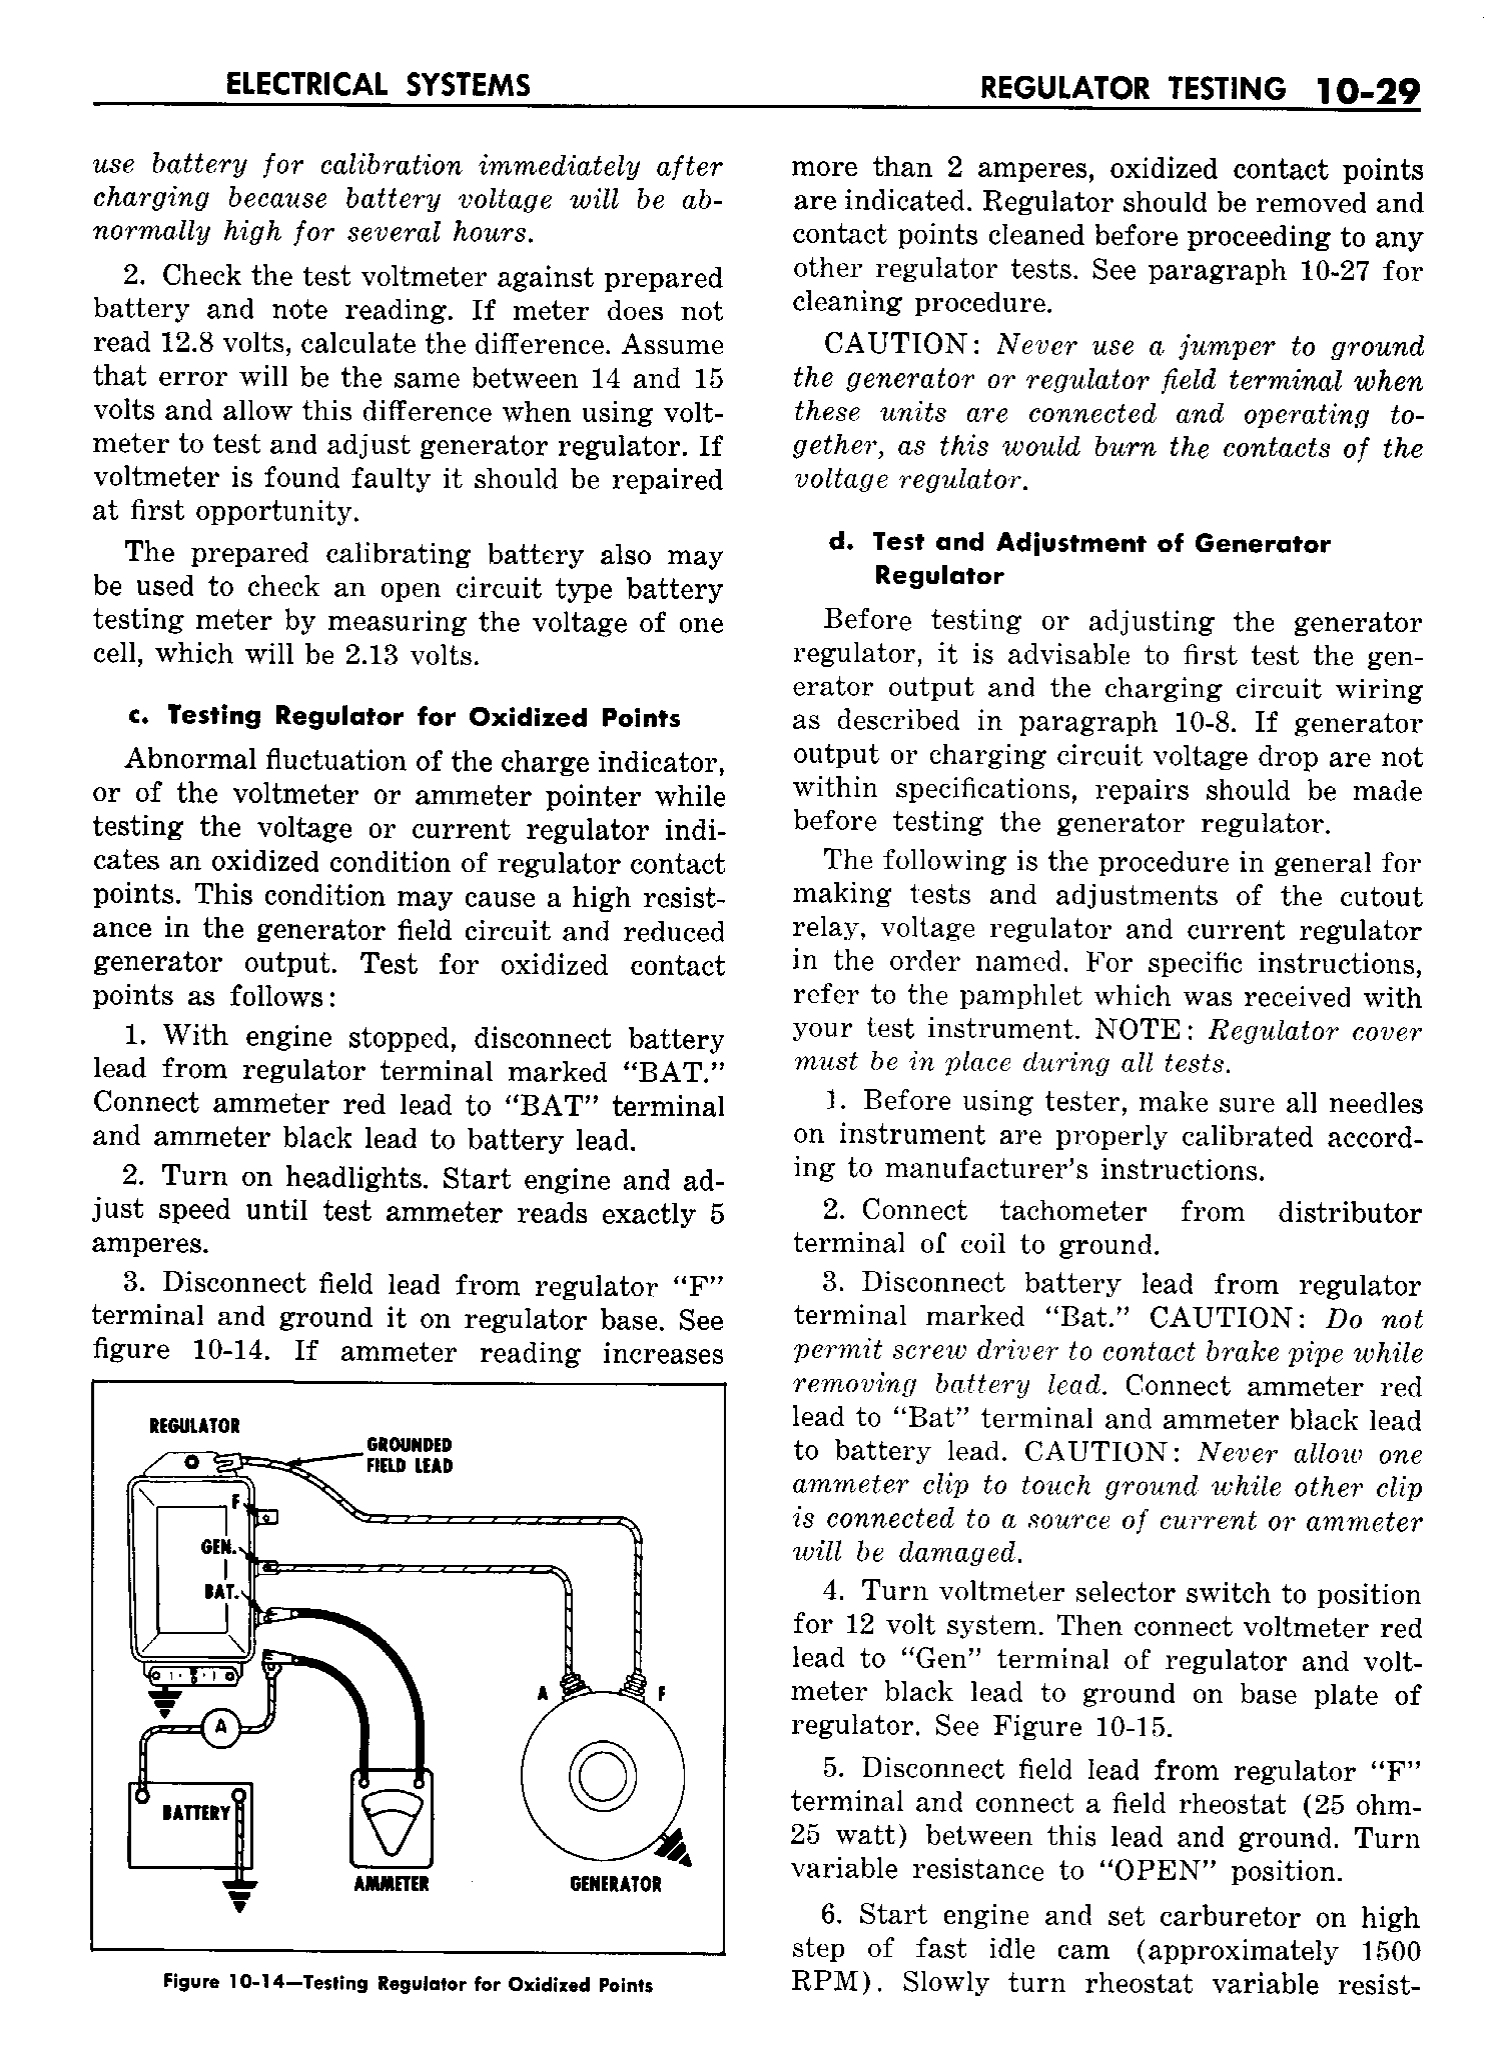 n_11 1958 Buick Shop Manual - Electrical Systems_29.jpg